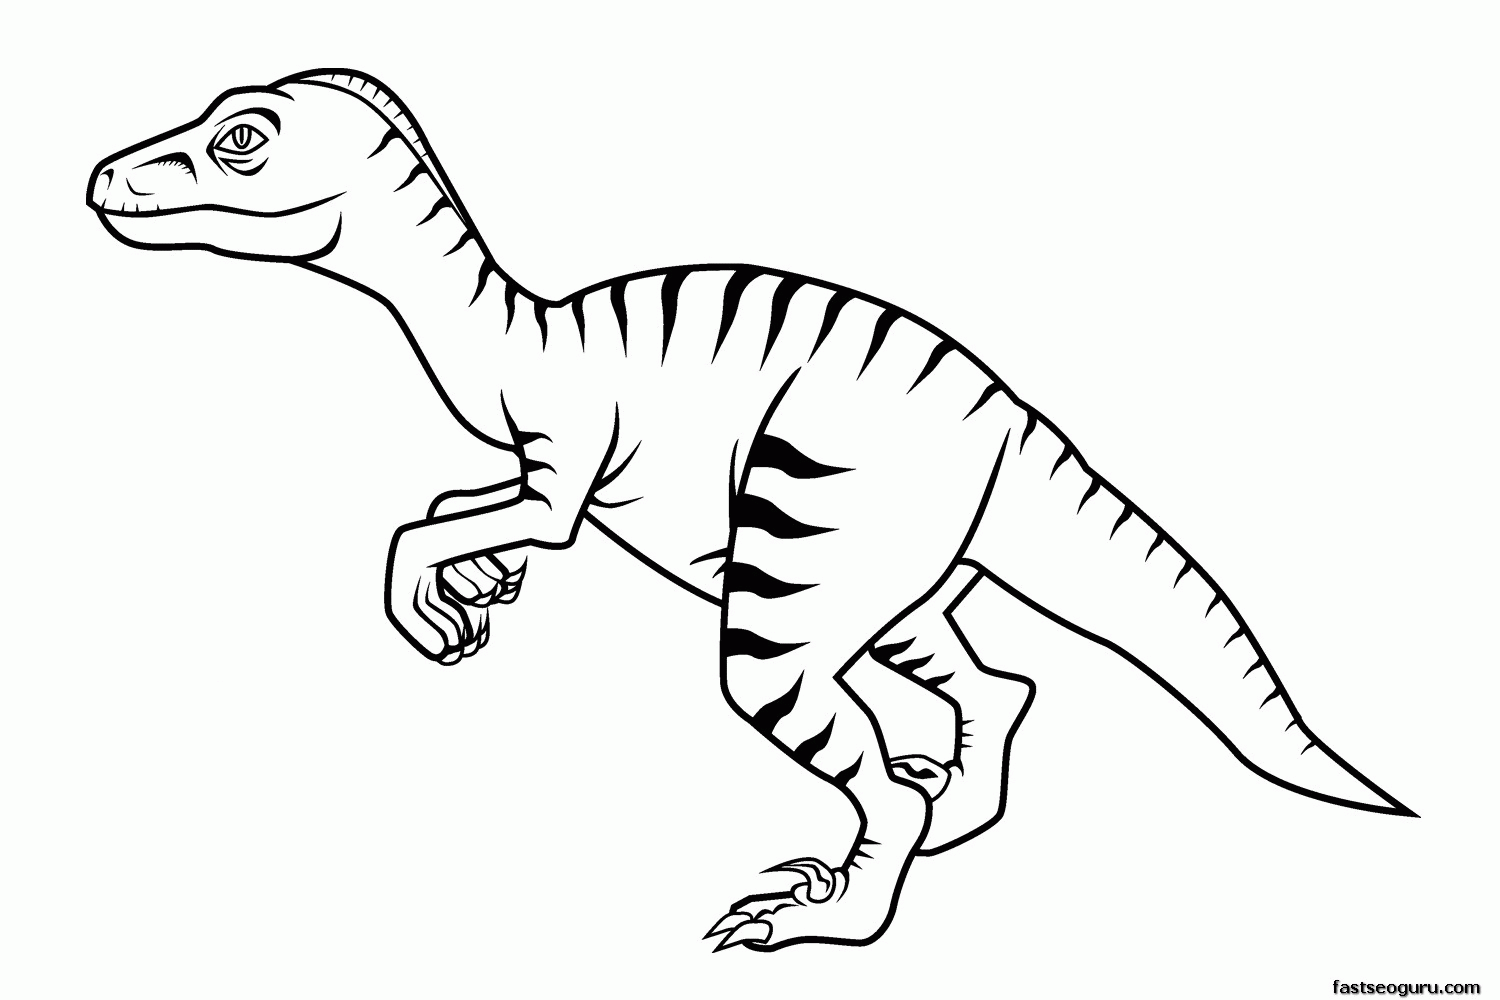 Dino Coloring Pages (19 Pictures) - Colorine.net | 7075